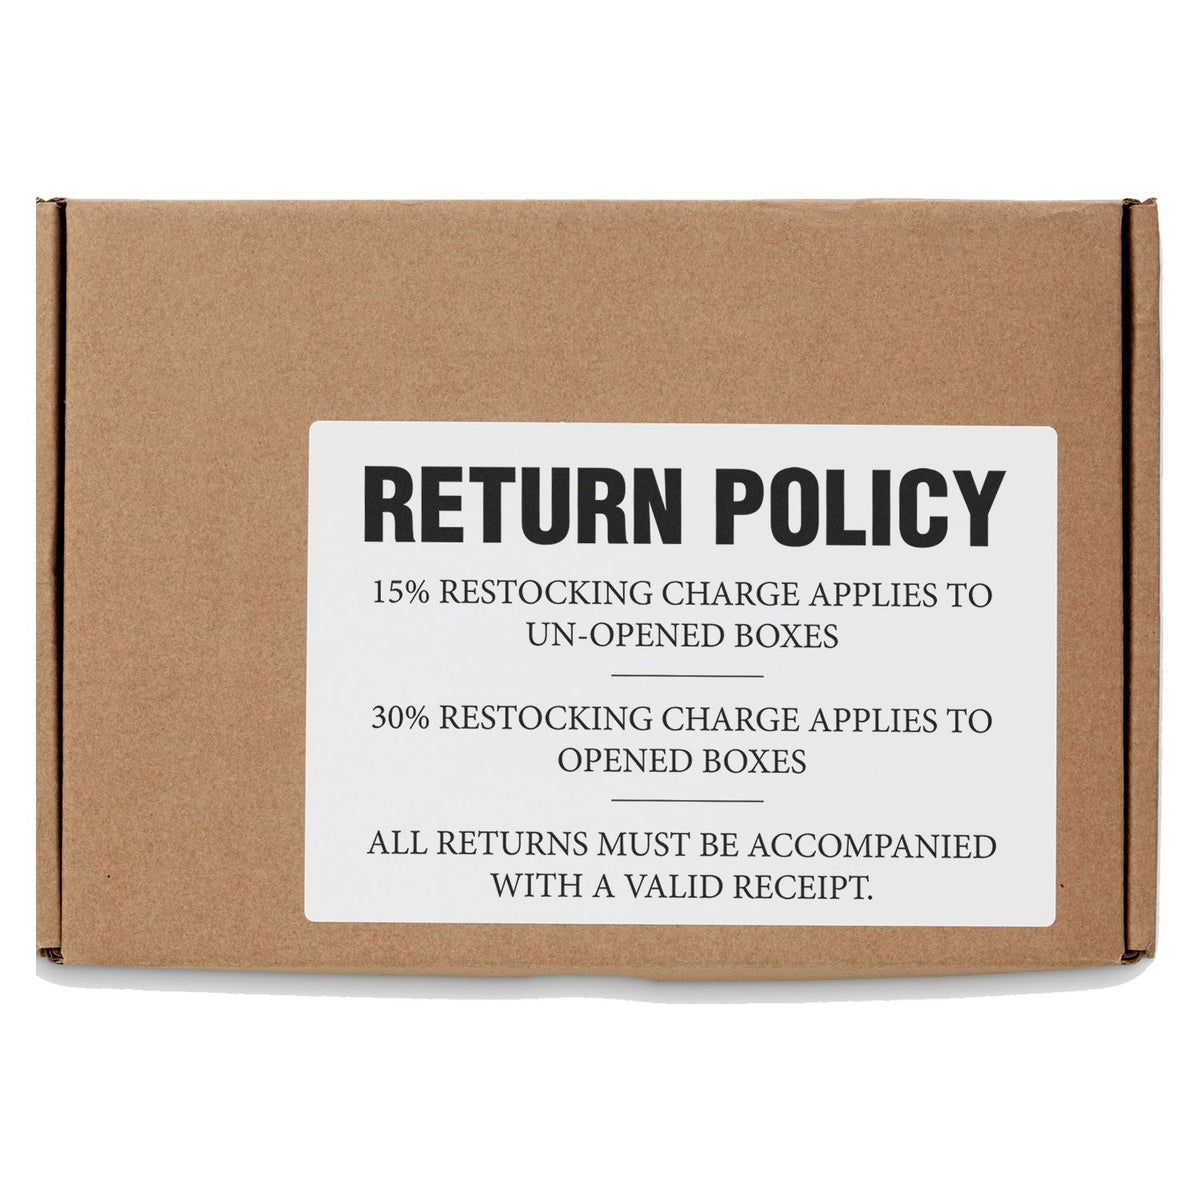 Return Policy Stamp on Box Example